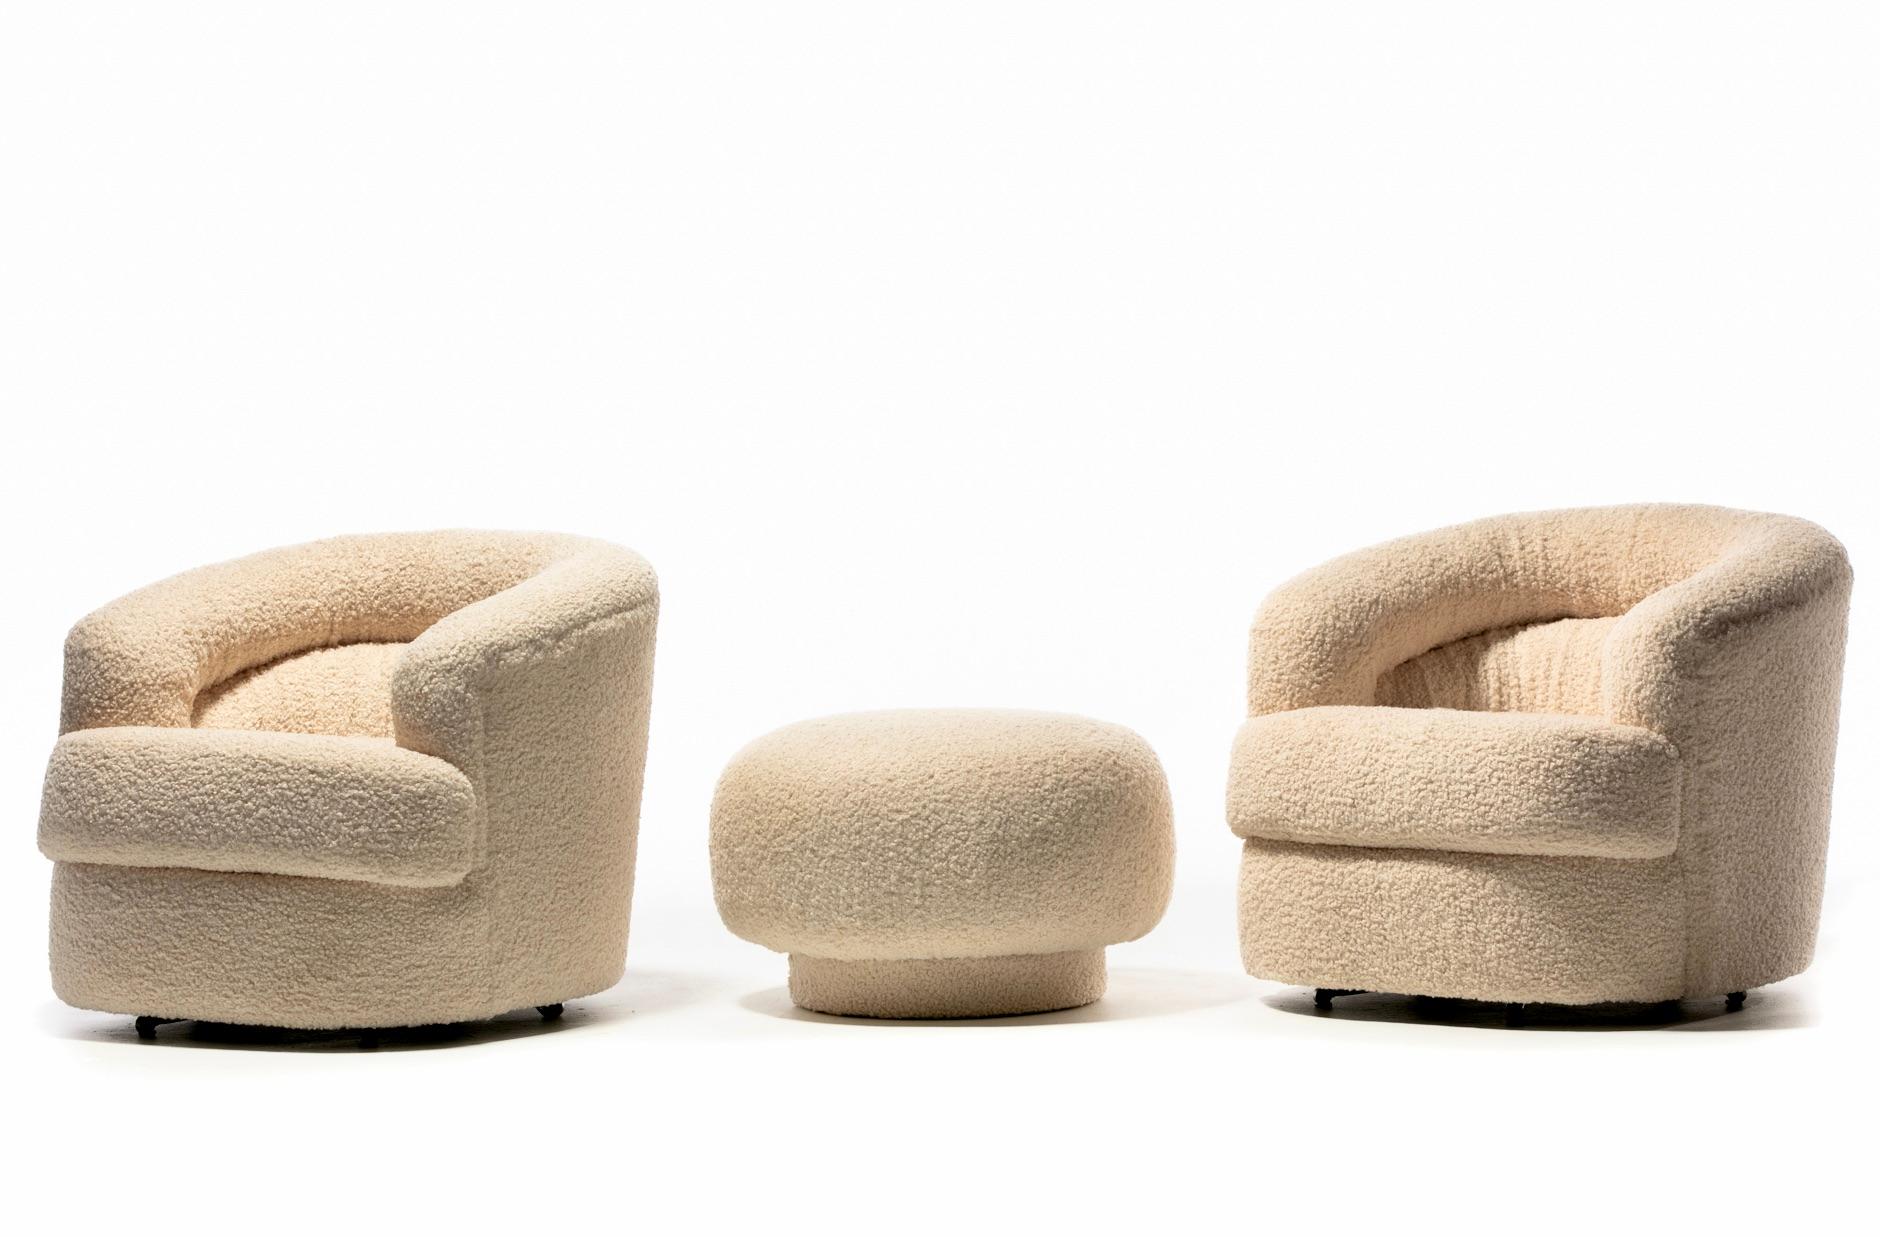 A high sculptural look that's modern with curvy plush all over cushioning is what you'll get with this ménage à trois set of swivel chairs attributed to Adrian Pearsall paired along with a sexy modern custom mushroom shaped ottoman. It all swivels -